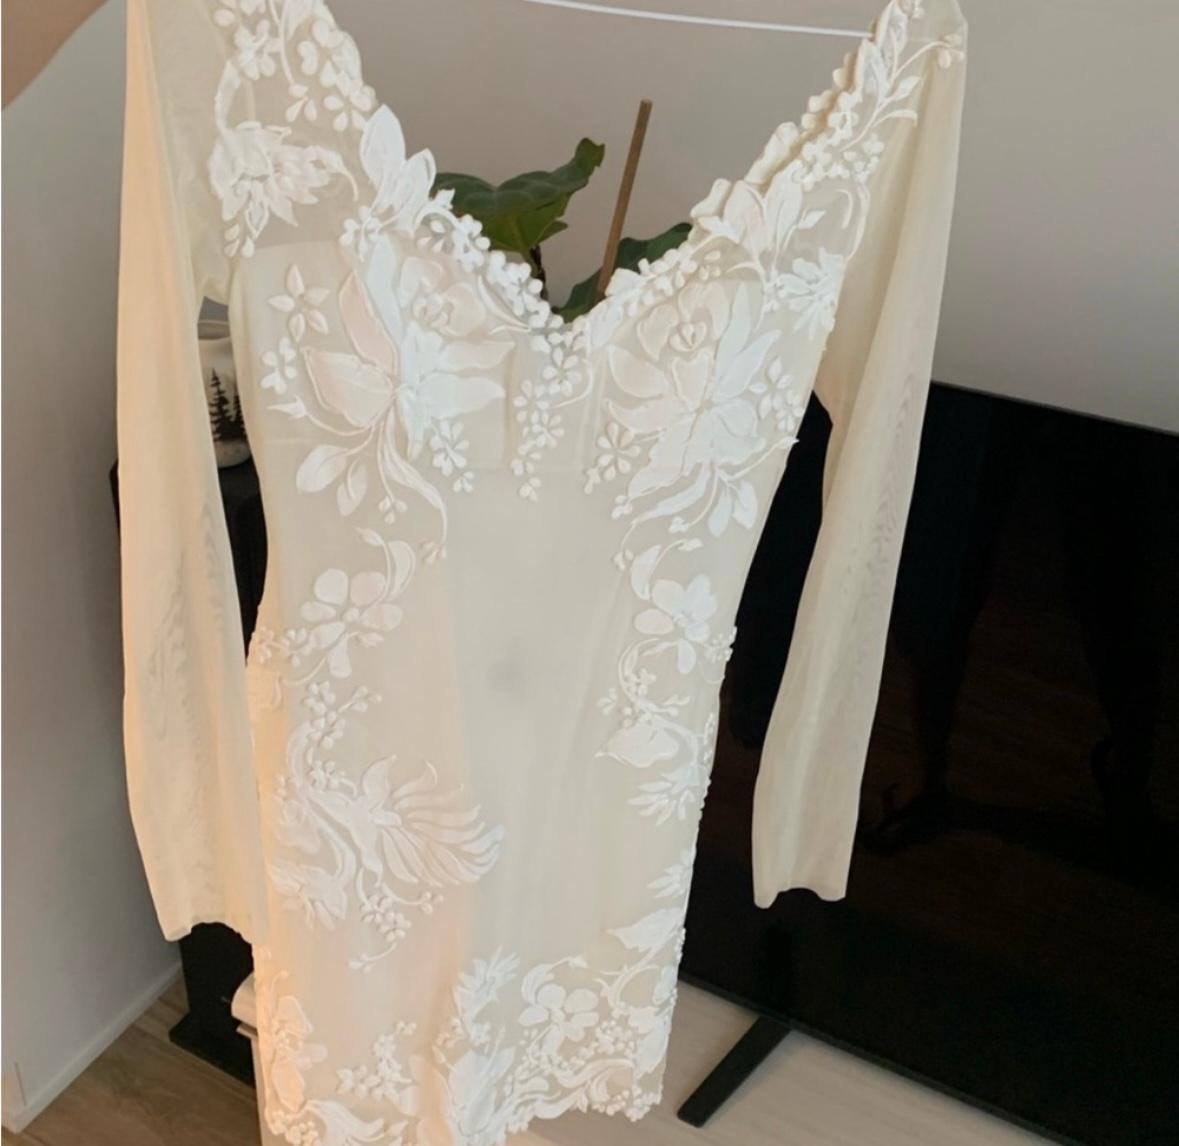 Gorgeous Ema Savahl white hand painted mini dress

Photos do not do it justice. 
Purchased for my wedding after party but have dropped a few pounds since and it s a tad big 
Size M, it’s got some stretch 
The breast area has lining and is not